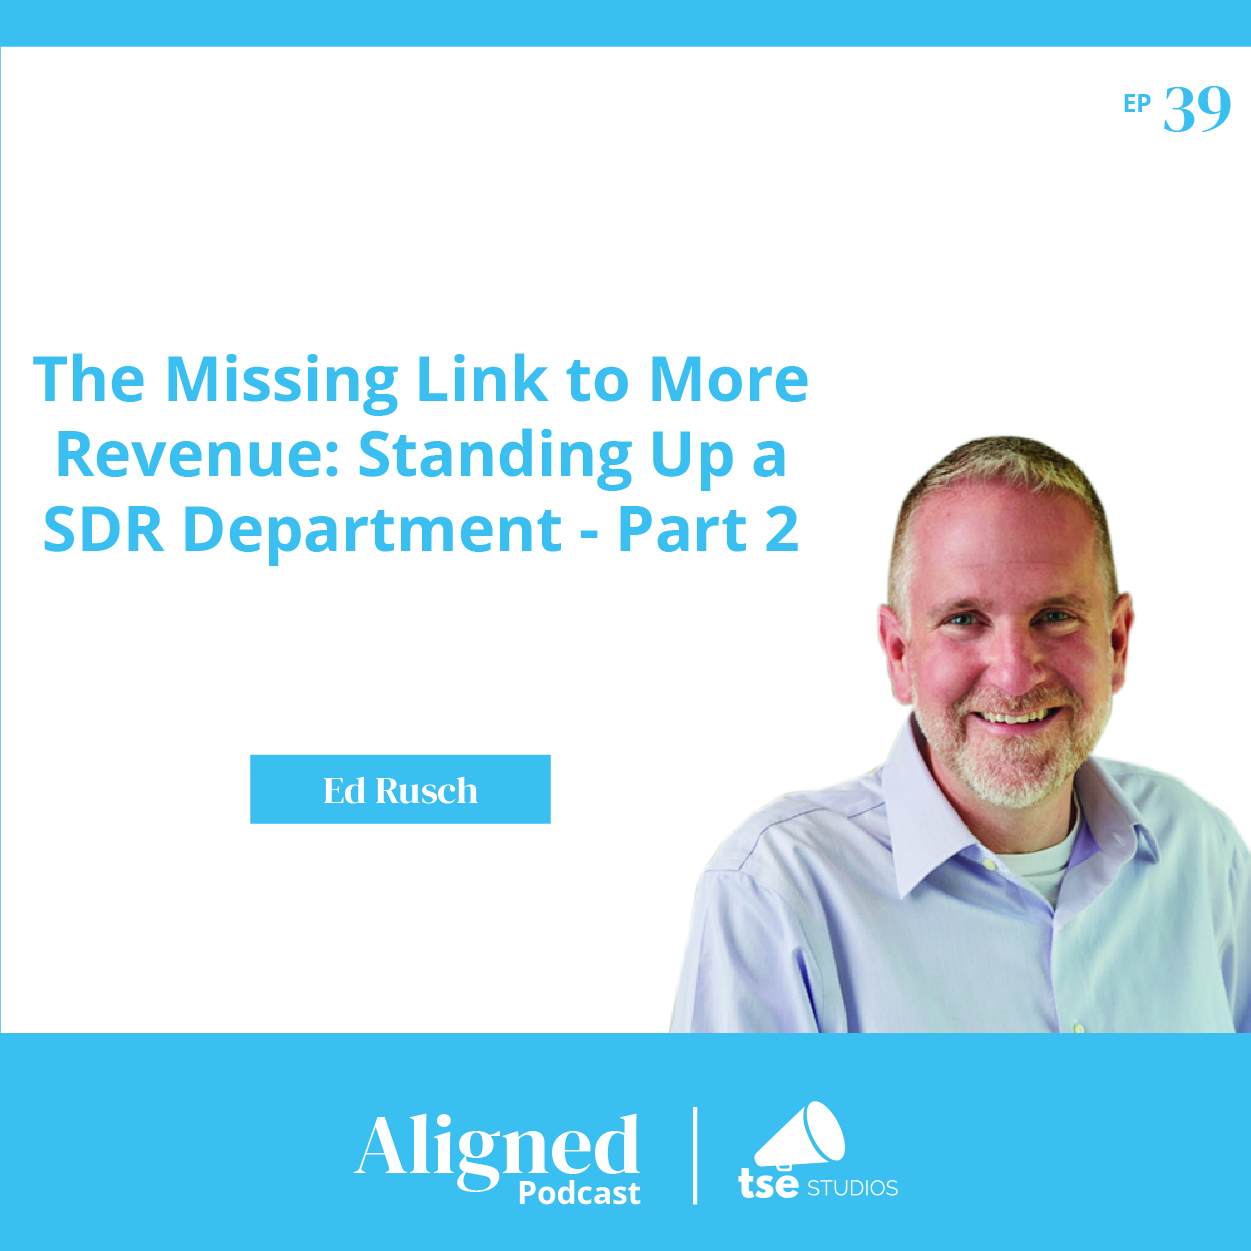 The Missing Link to More Revenue: Standing up a SDR Department - Part 2